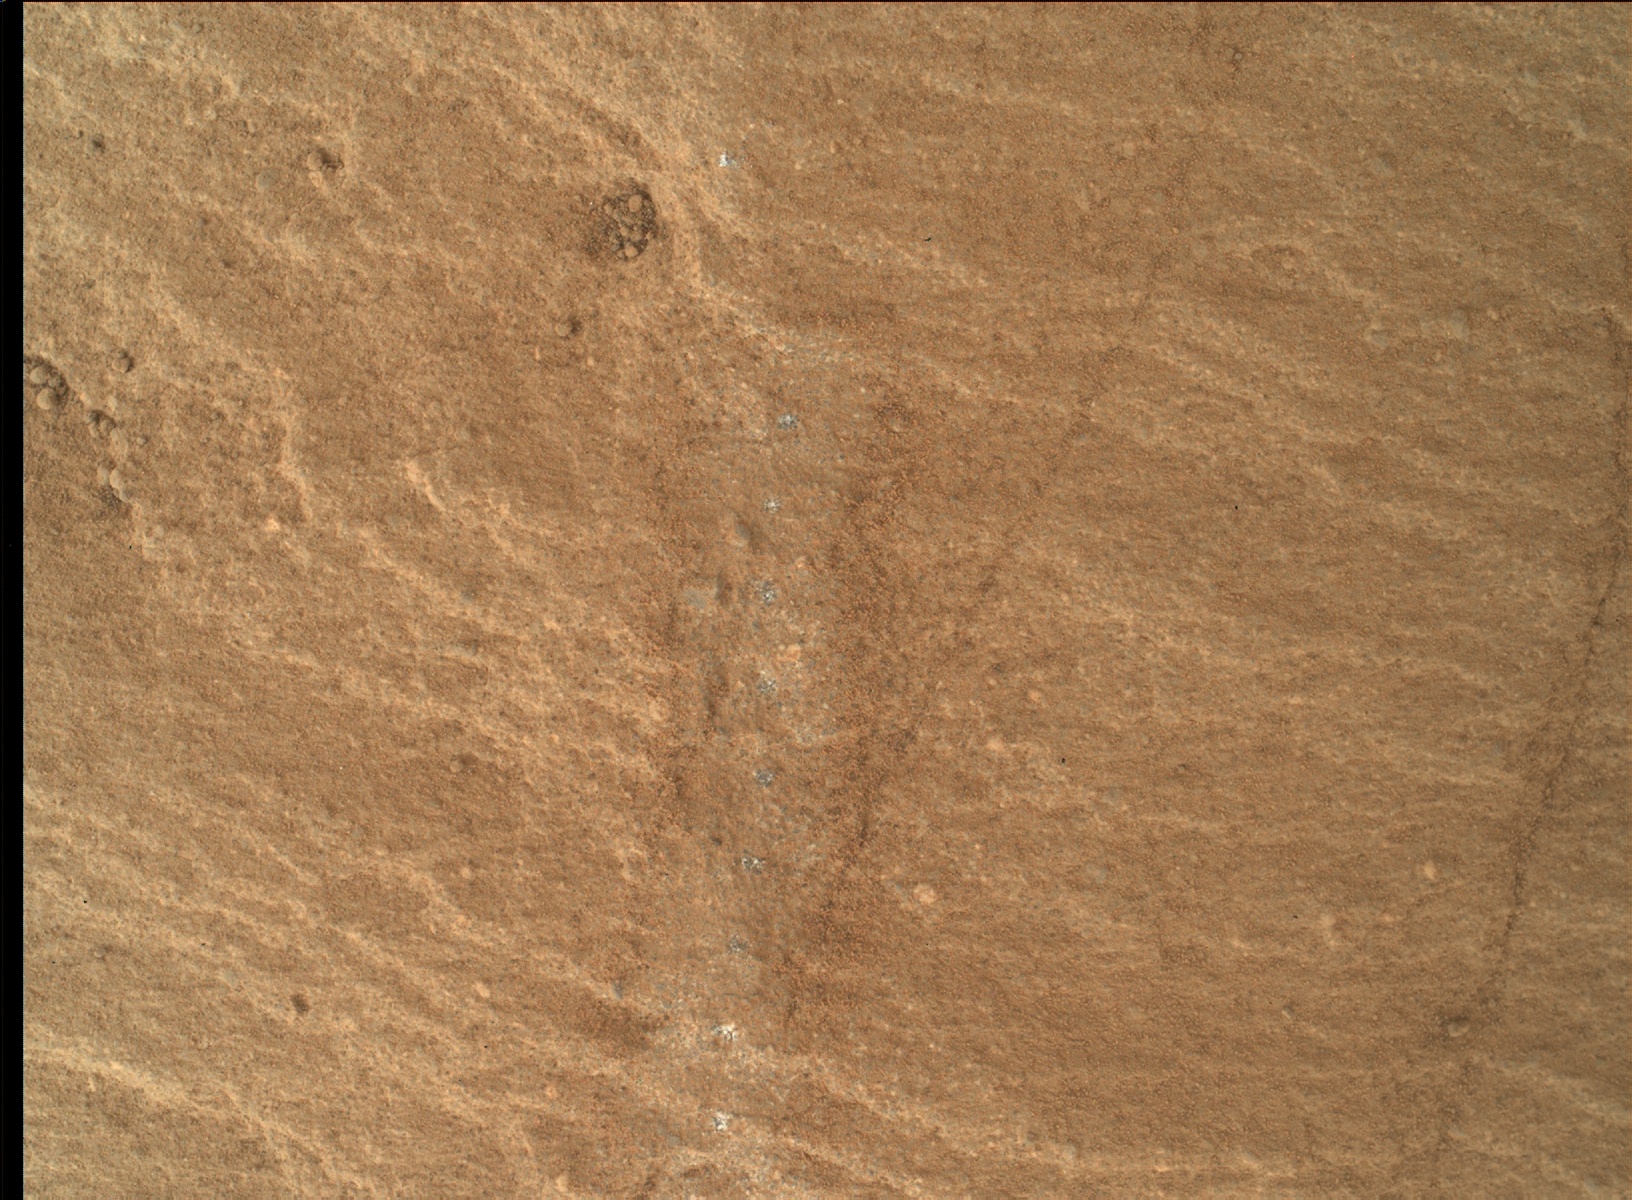 Nasa's Mars rover Curiosity acquired this image using its Mars Hand Lens Imager (MAHLI) on Sol 1134